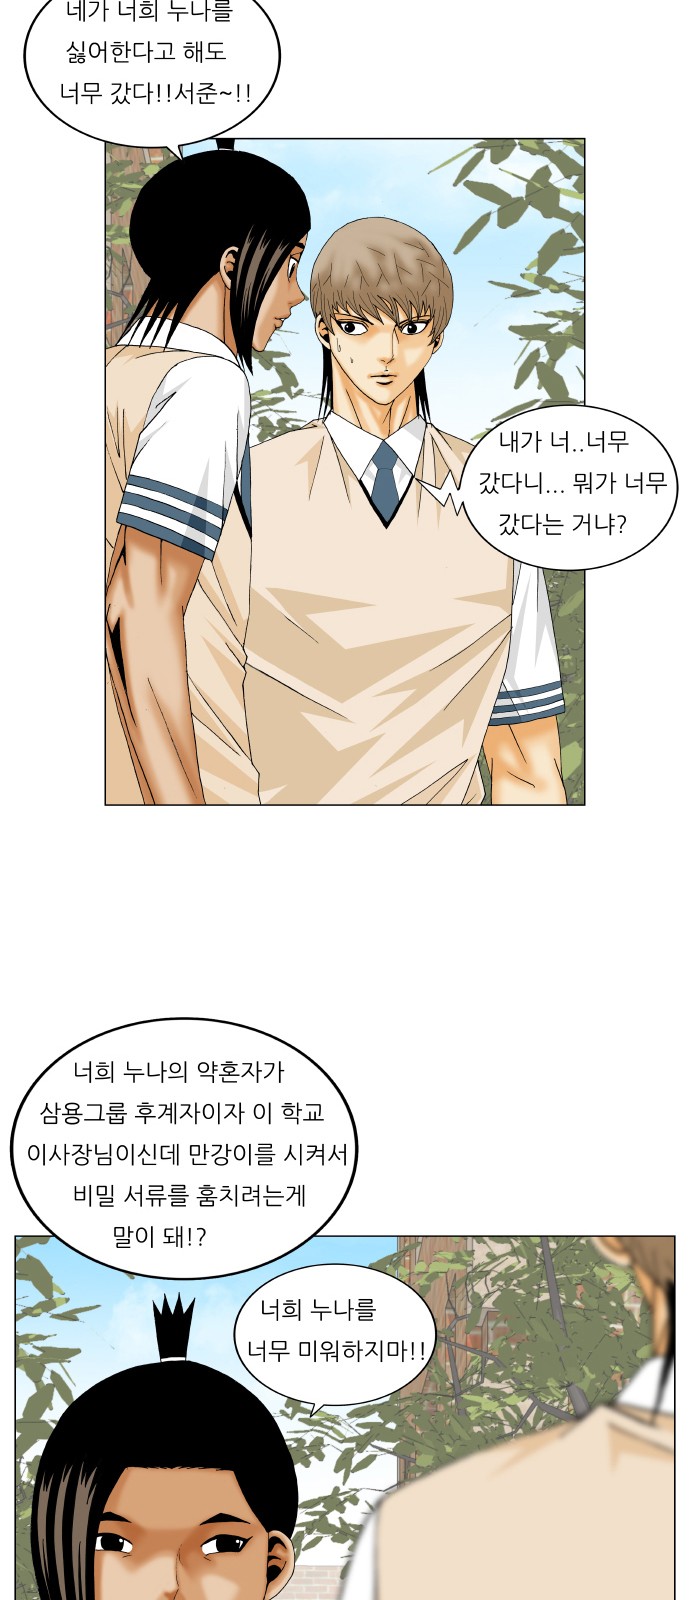 Ultimate Legend - Kang Hae Hyo - Chapter 221 - Page 2